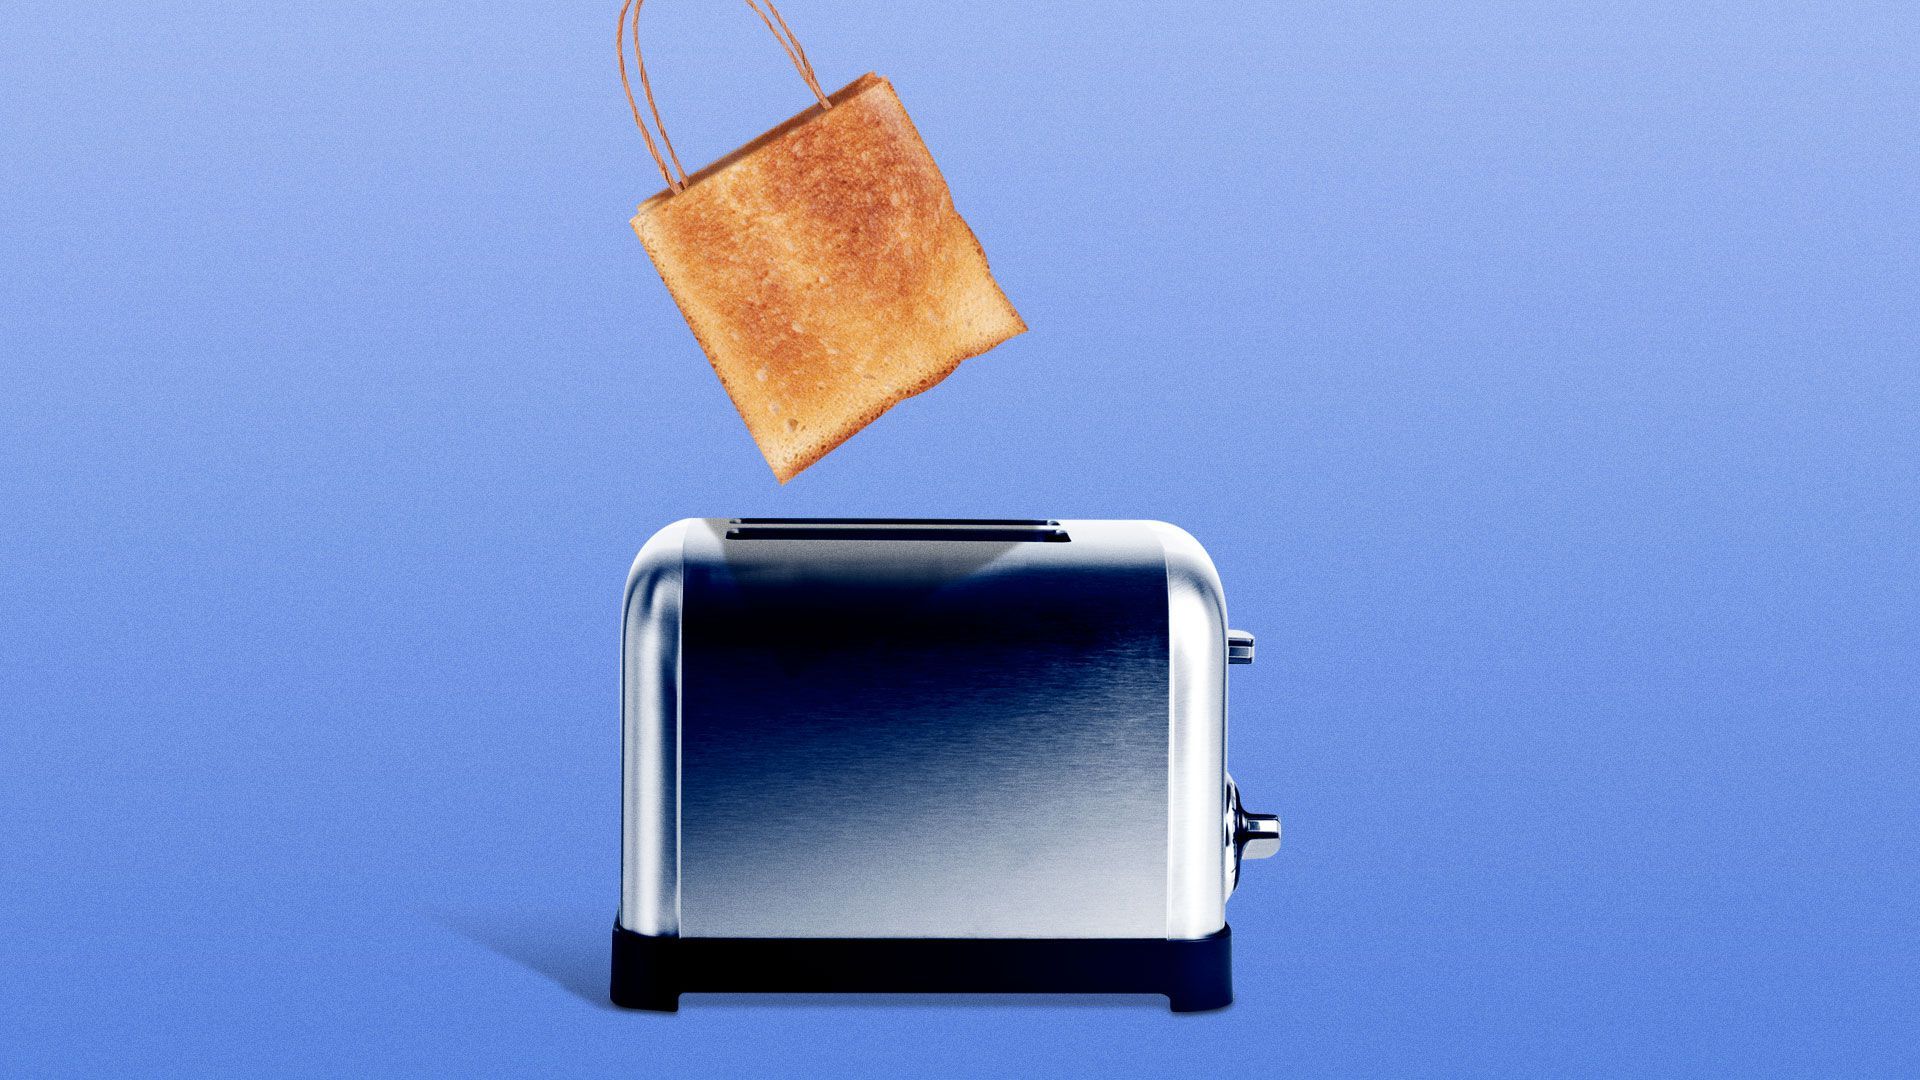 Illustration of toaster with shopping bag toast popping out